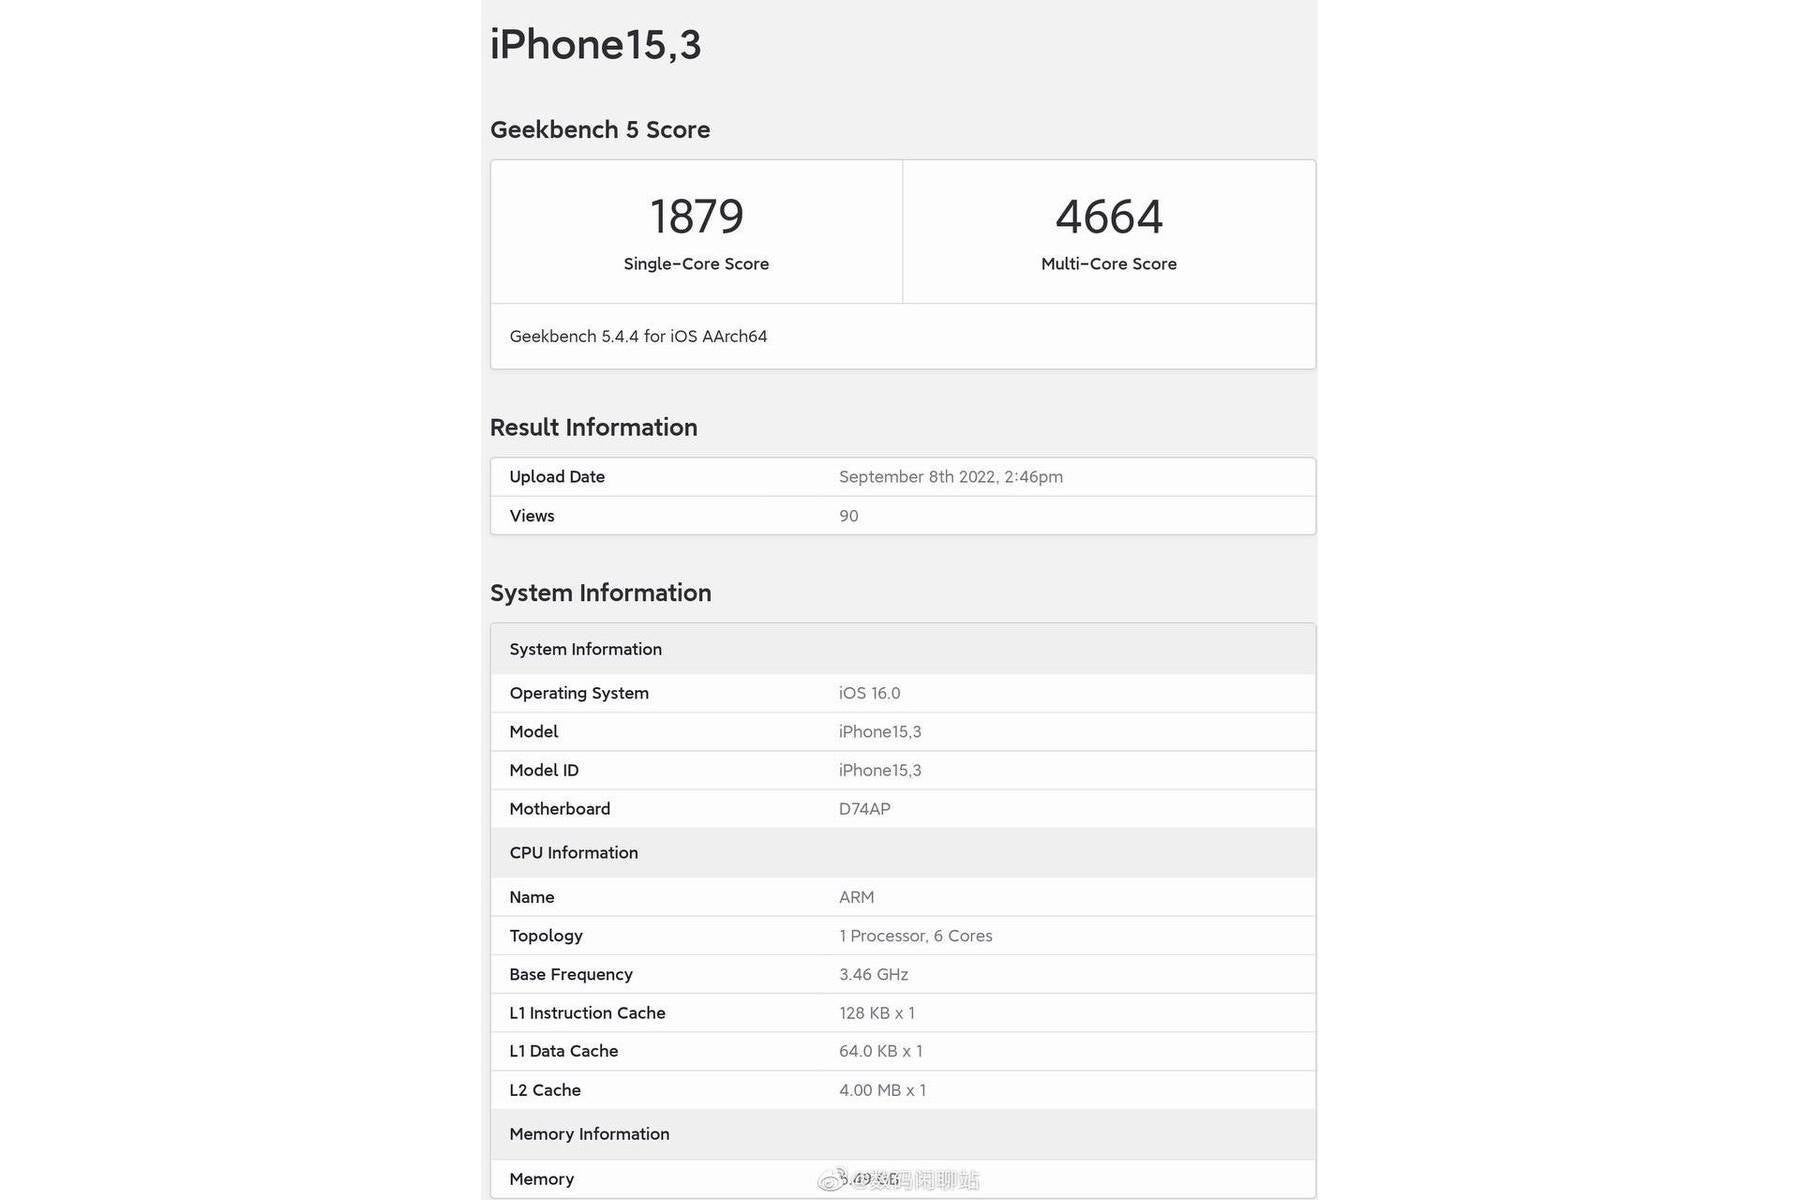 Alleged iPhone 14 Pro benchmark scores - iPhone 14 Pro&#039;s powerful A16 Bionic chip destroys Android competition in benchmark results